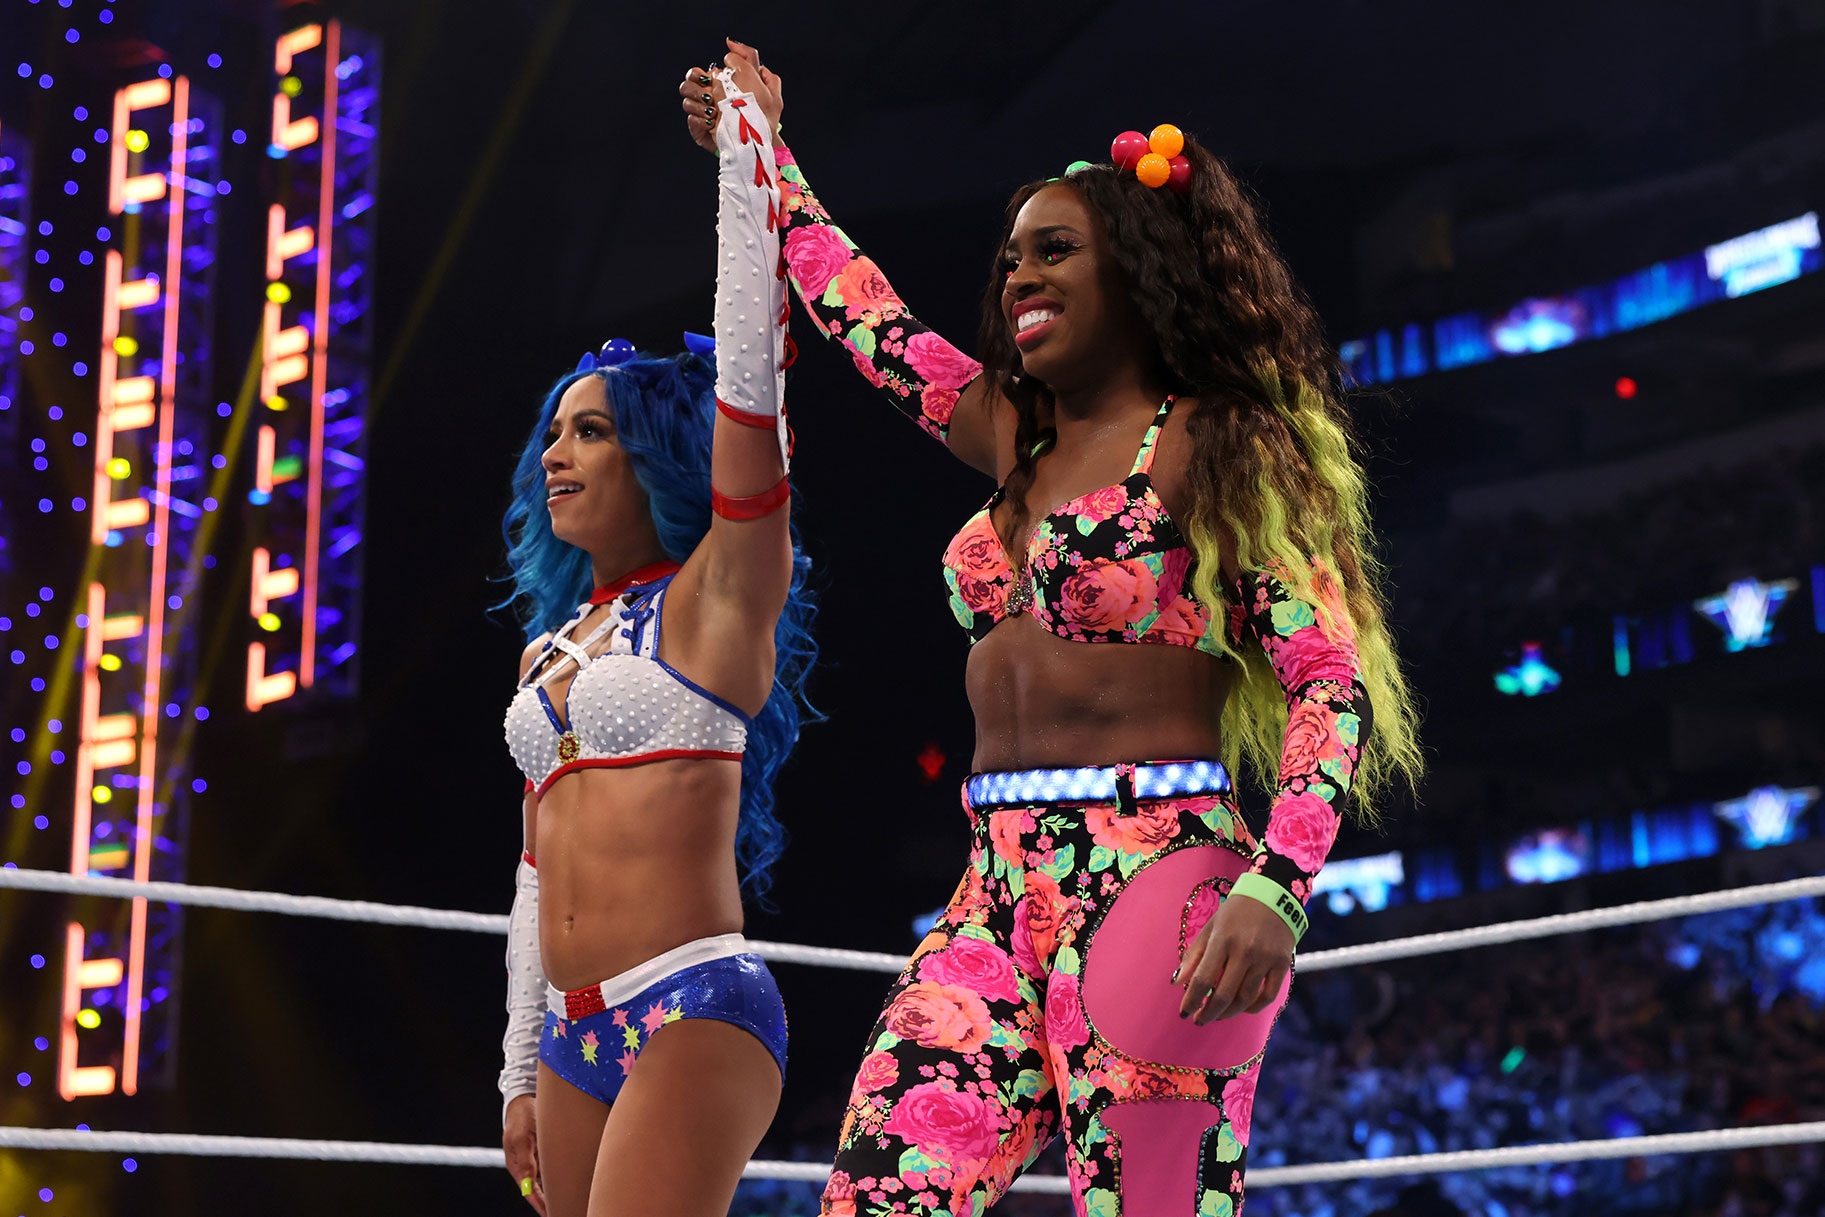 Sasha Banks and Naomi holding hands in the ring